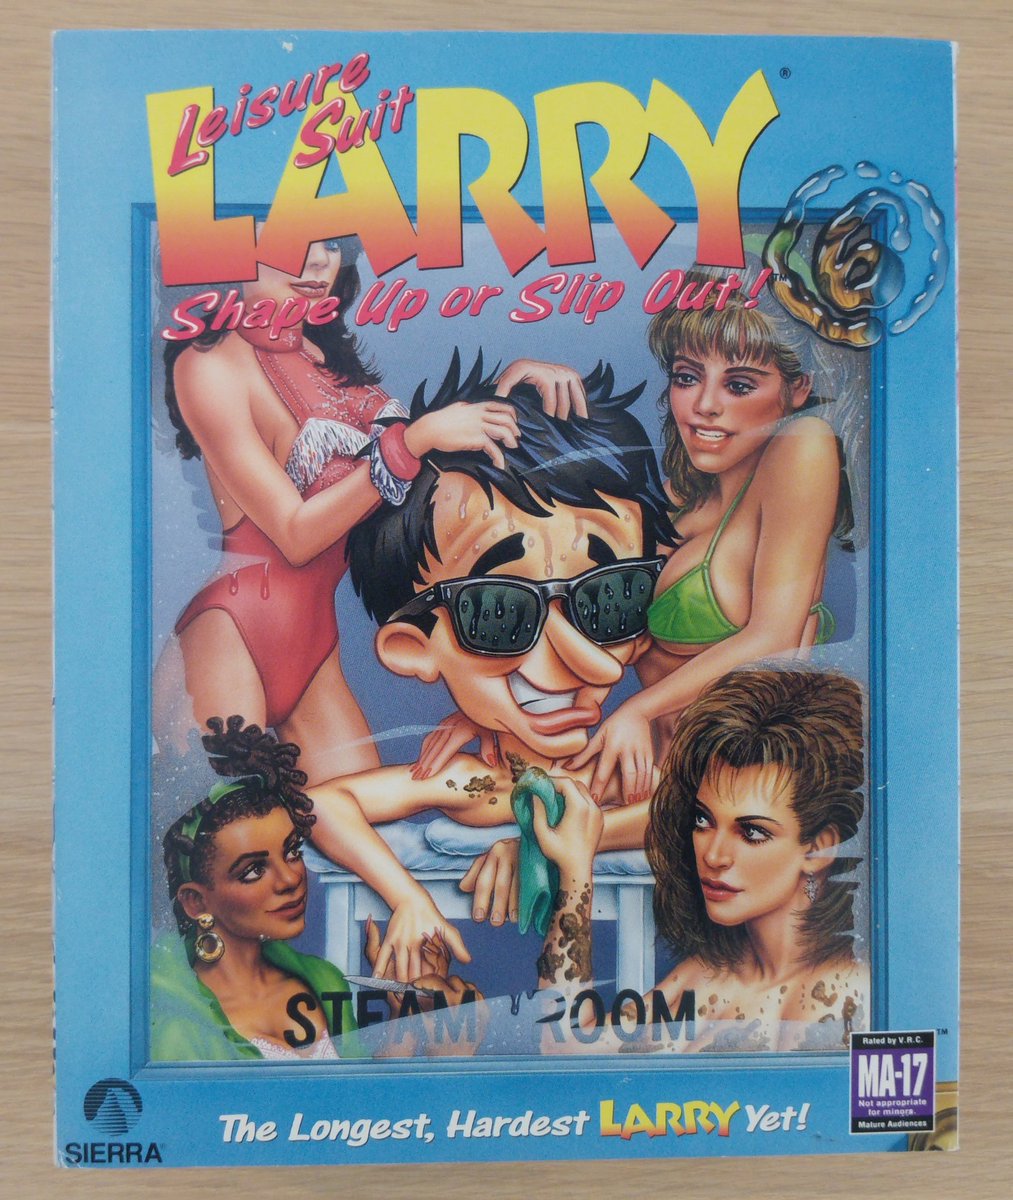 📦

Game Box

Leisure Suit Larry 6: Shape Up or Slip Out! (1993)

#LeisureSuitLarry #BigBox #SierraOnLine #SierraGames #Sierra #AdventureGame #PointAndClick #RetroGaming #RetroGames #RetroGamer #Nerd #Geek #PcGaming #PcGames #DOSGaming #Gaming #VideoGames #Games #Collector #90s